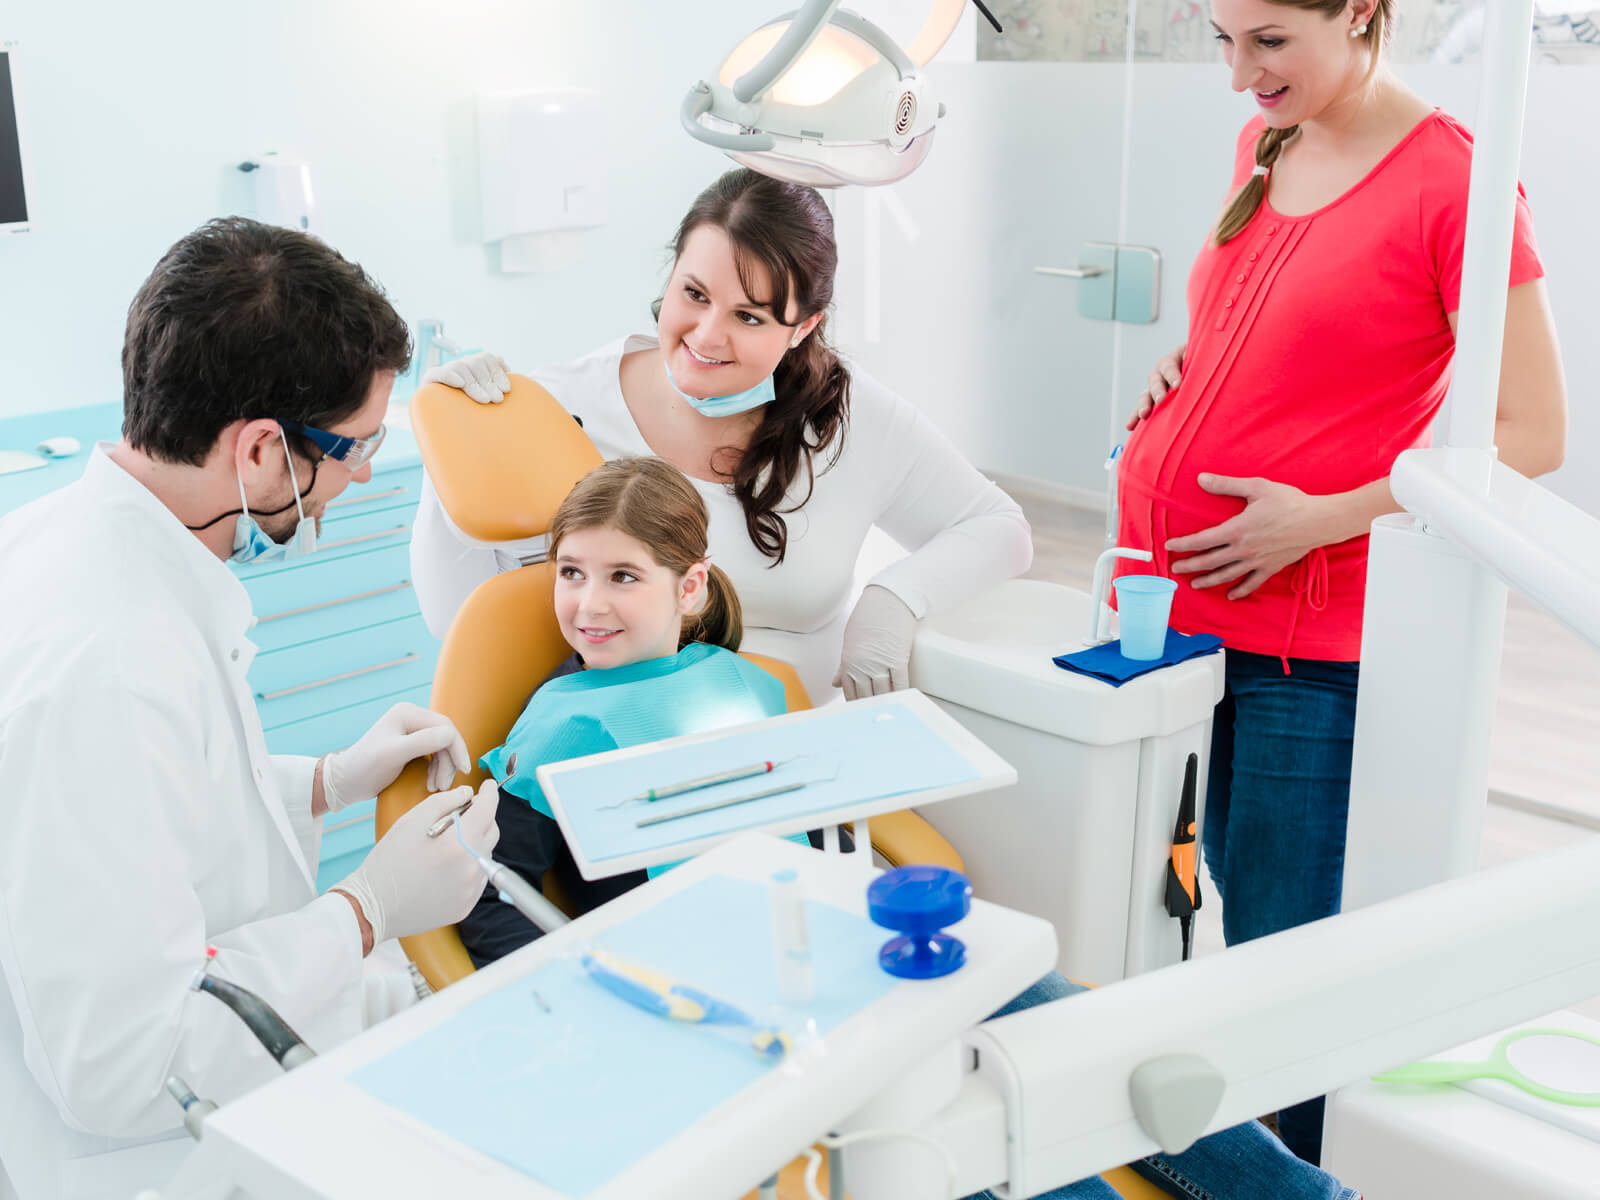 Tips to help parents ensure their child’s dental health